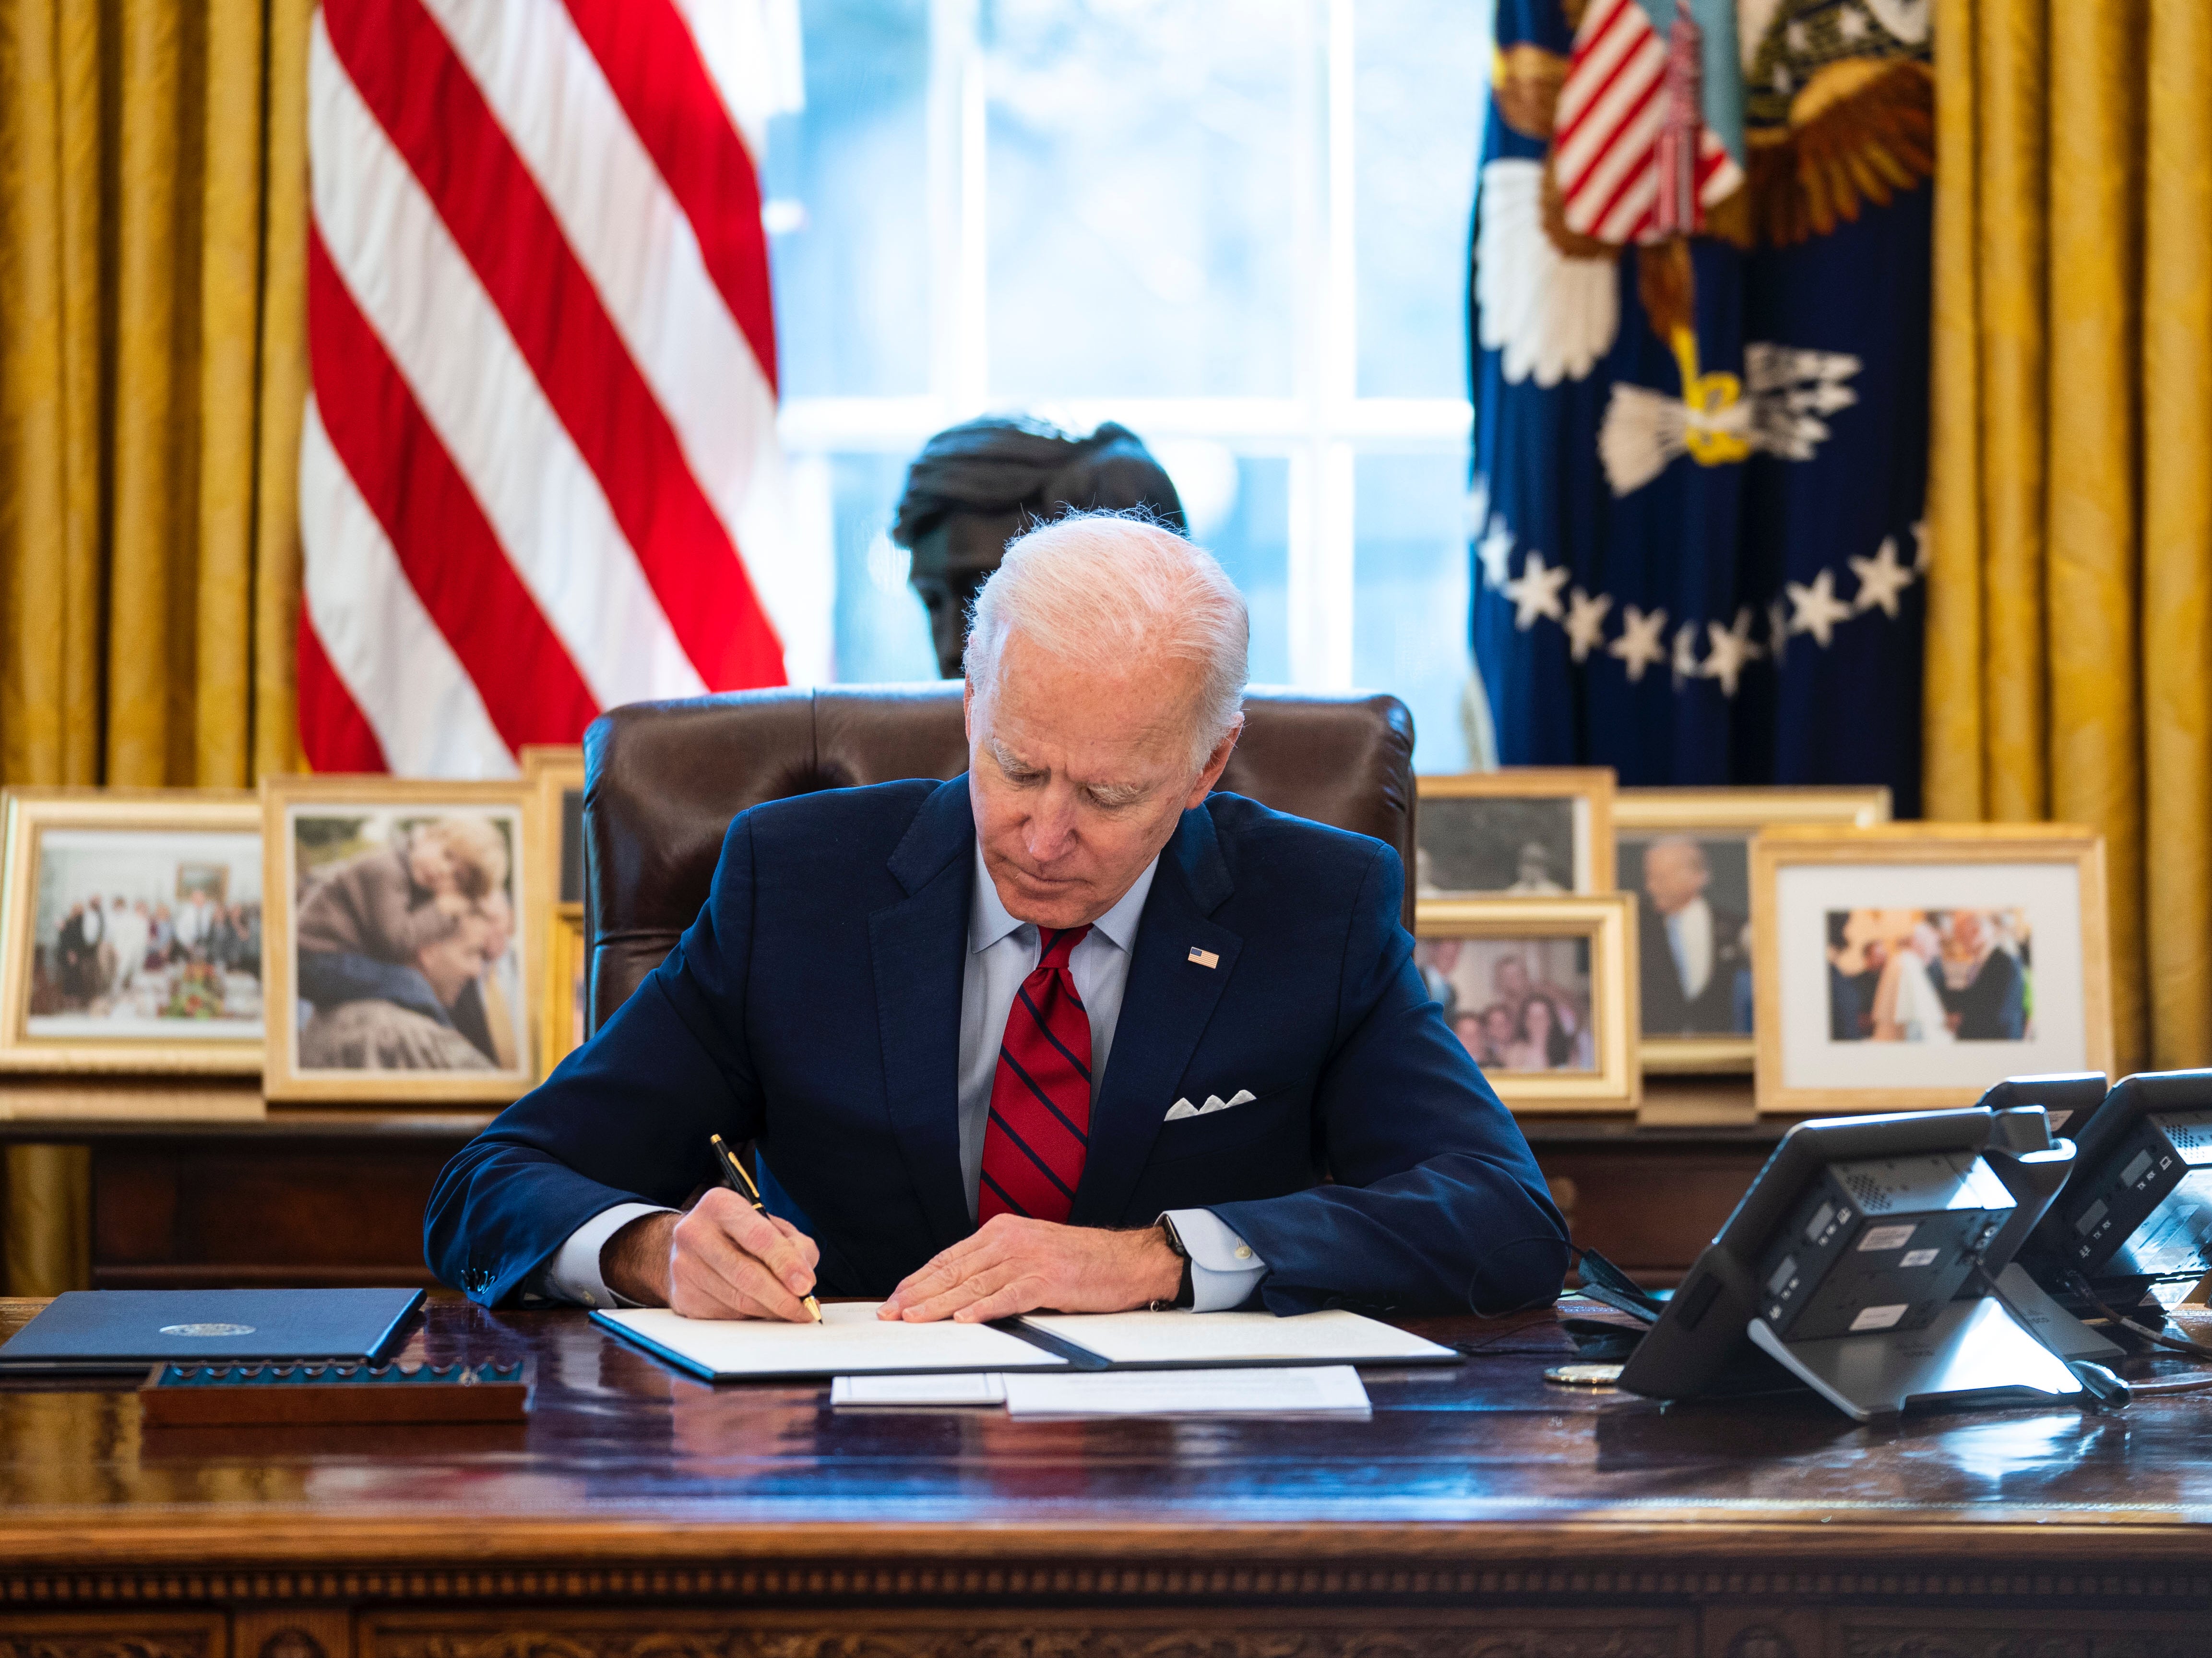 Joe Biden signs an executive order in the Oval Office